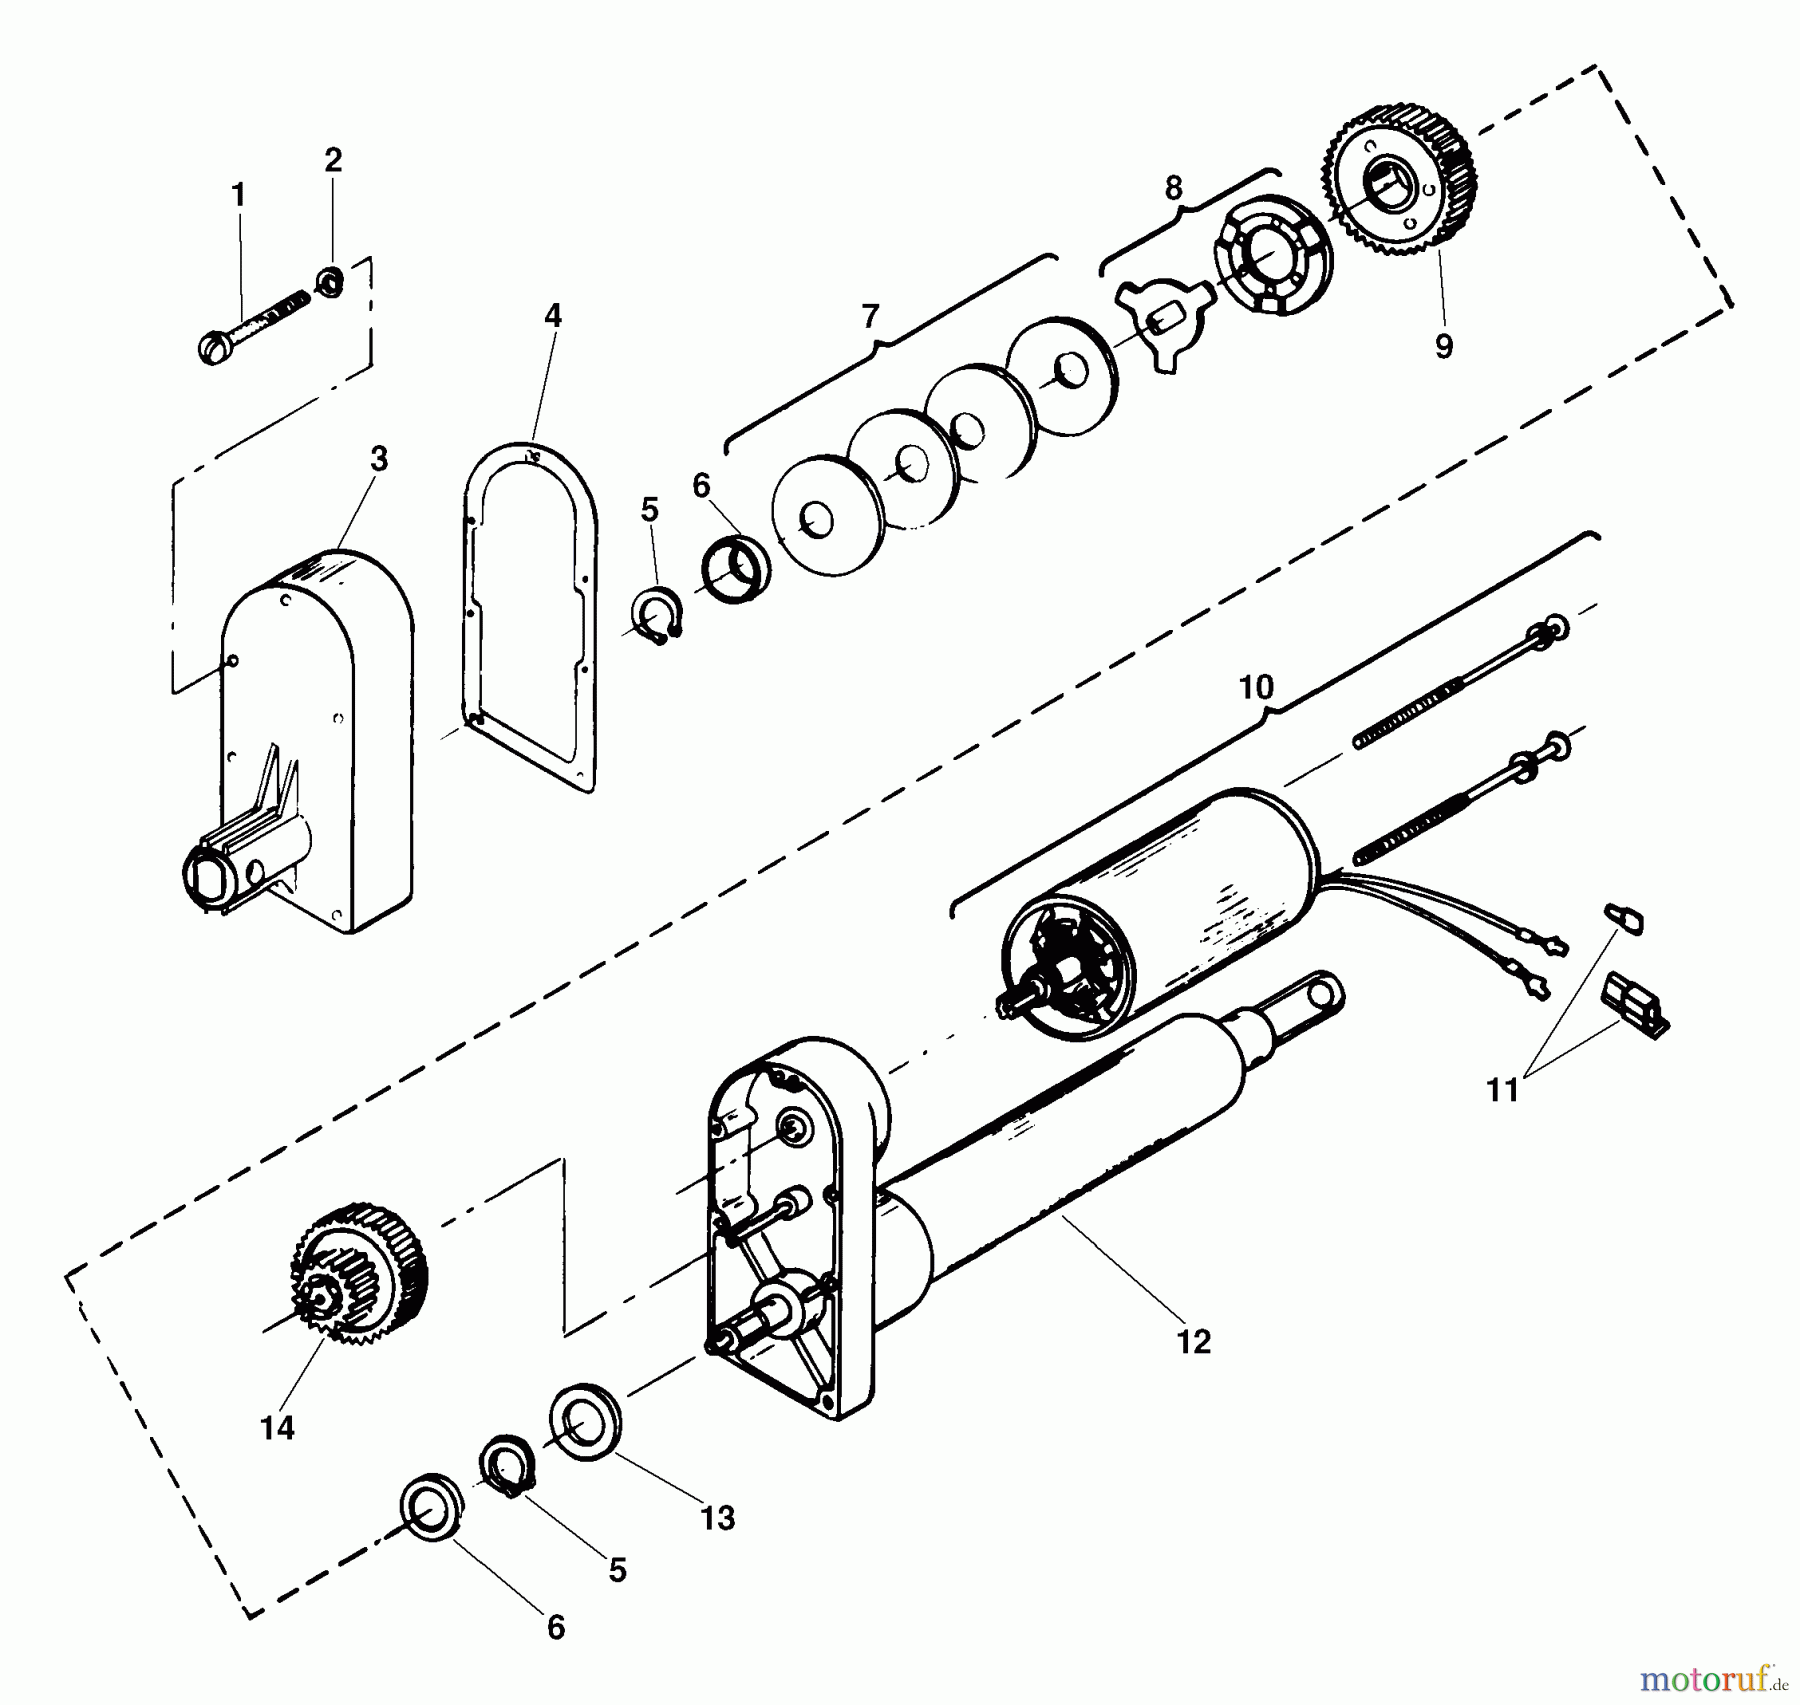  Husqvarna Zubehör, Rasenmäher / Mäher EAV 20A - Husqvarna Electric Lift Kit for Hydro Tractors W/Side Mounted Pulley (2001-05 & After) Actuator